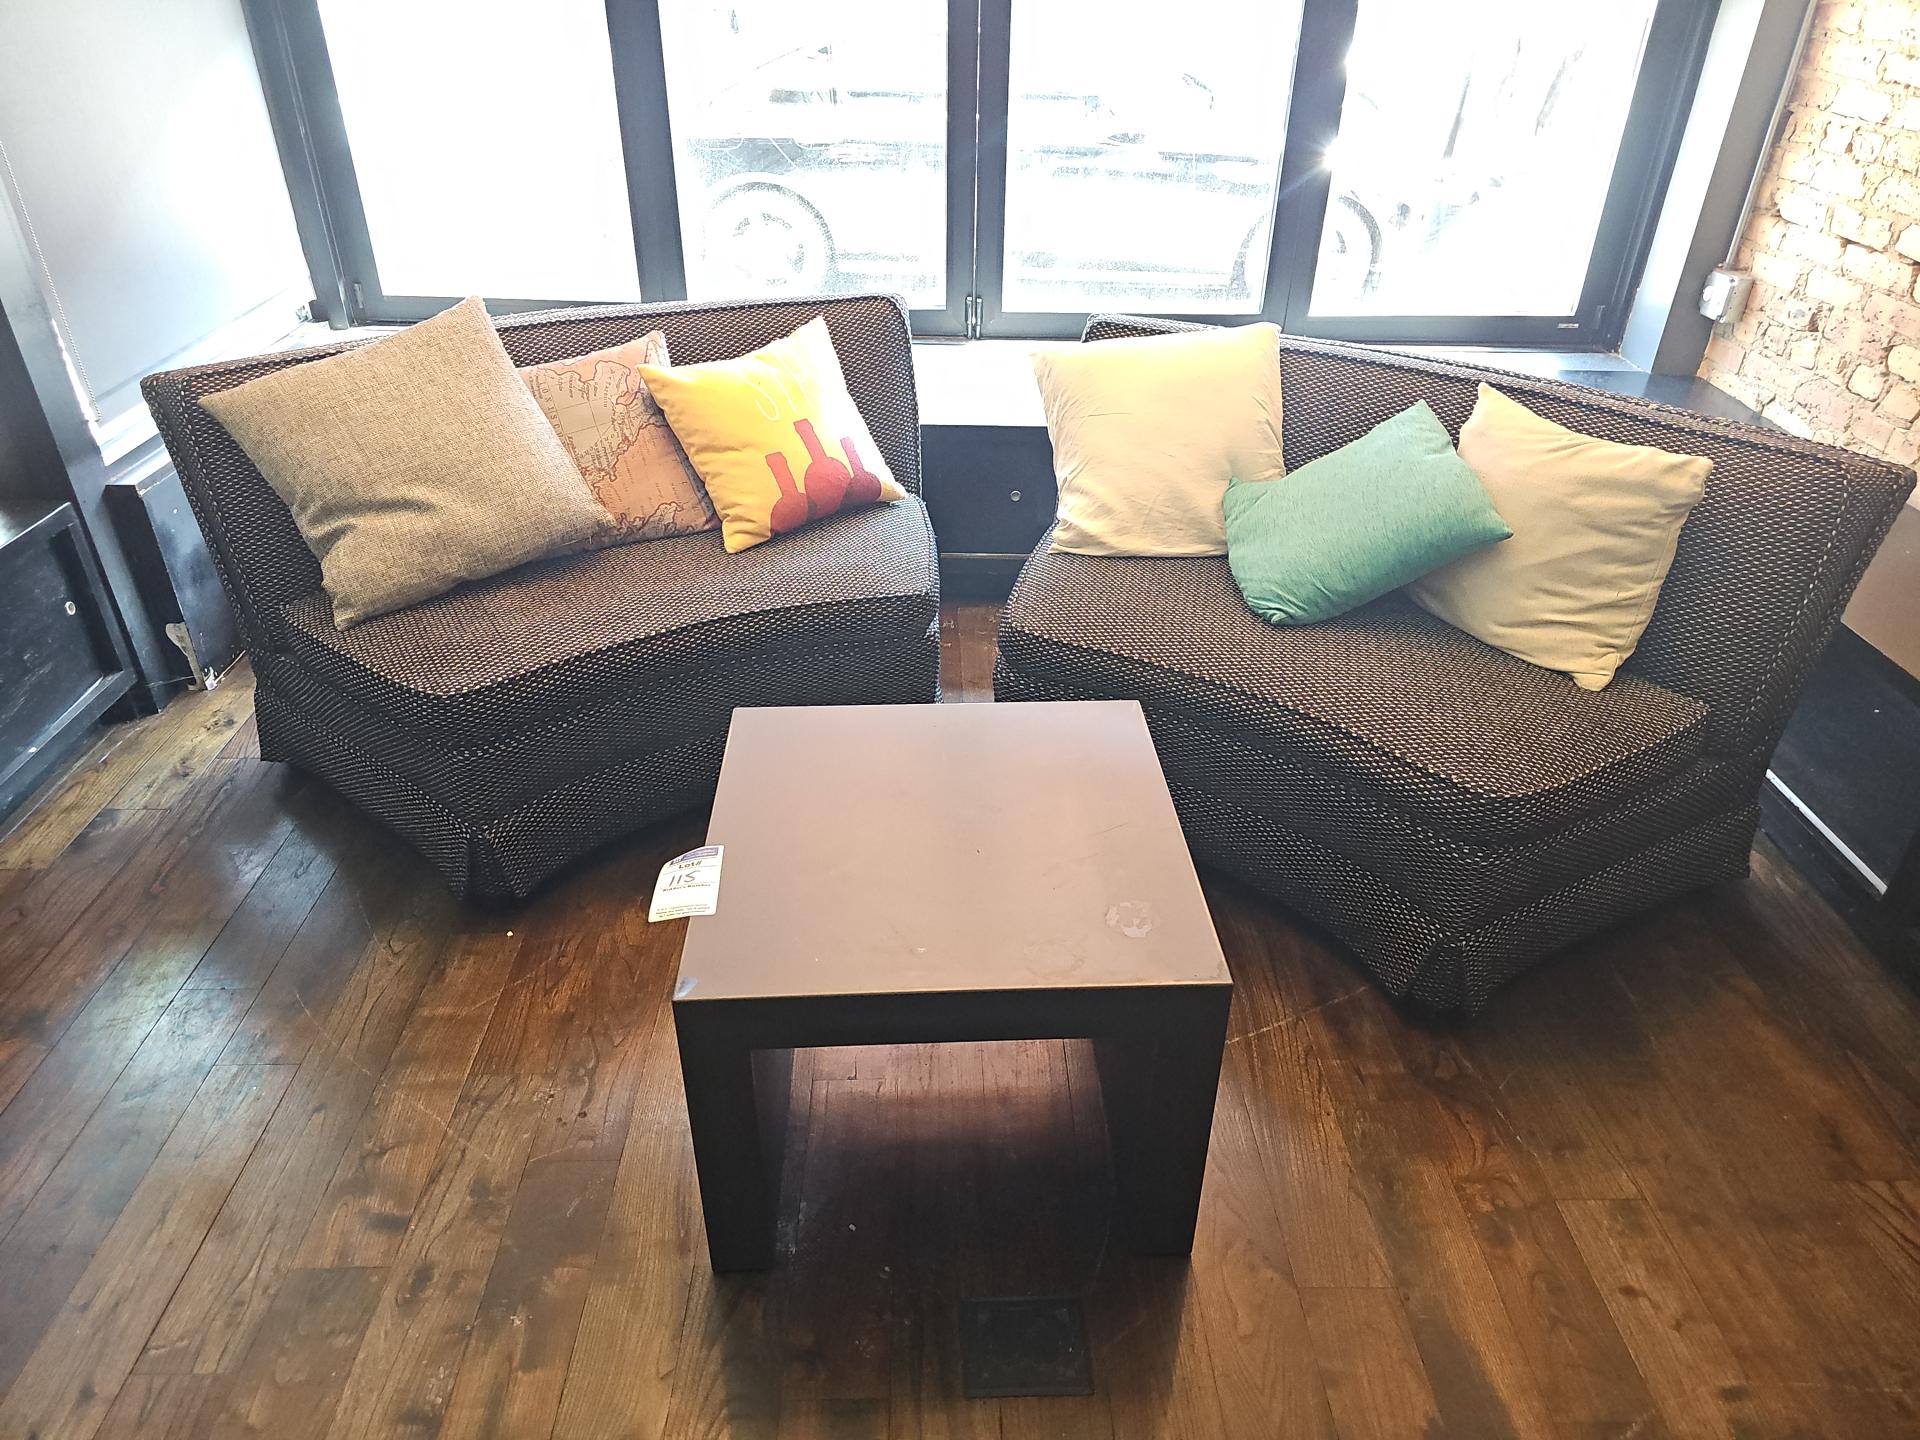 Half moon couches with 2' x 2' metal table